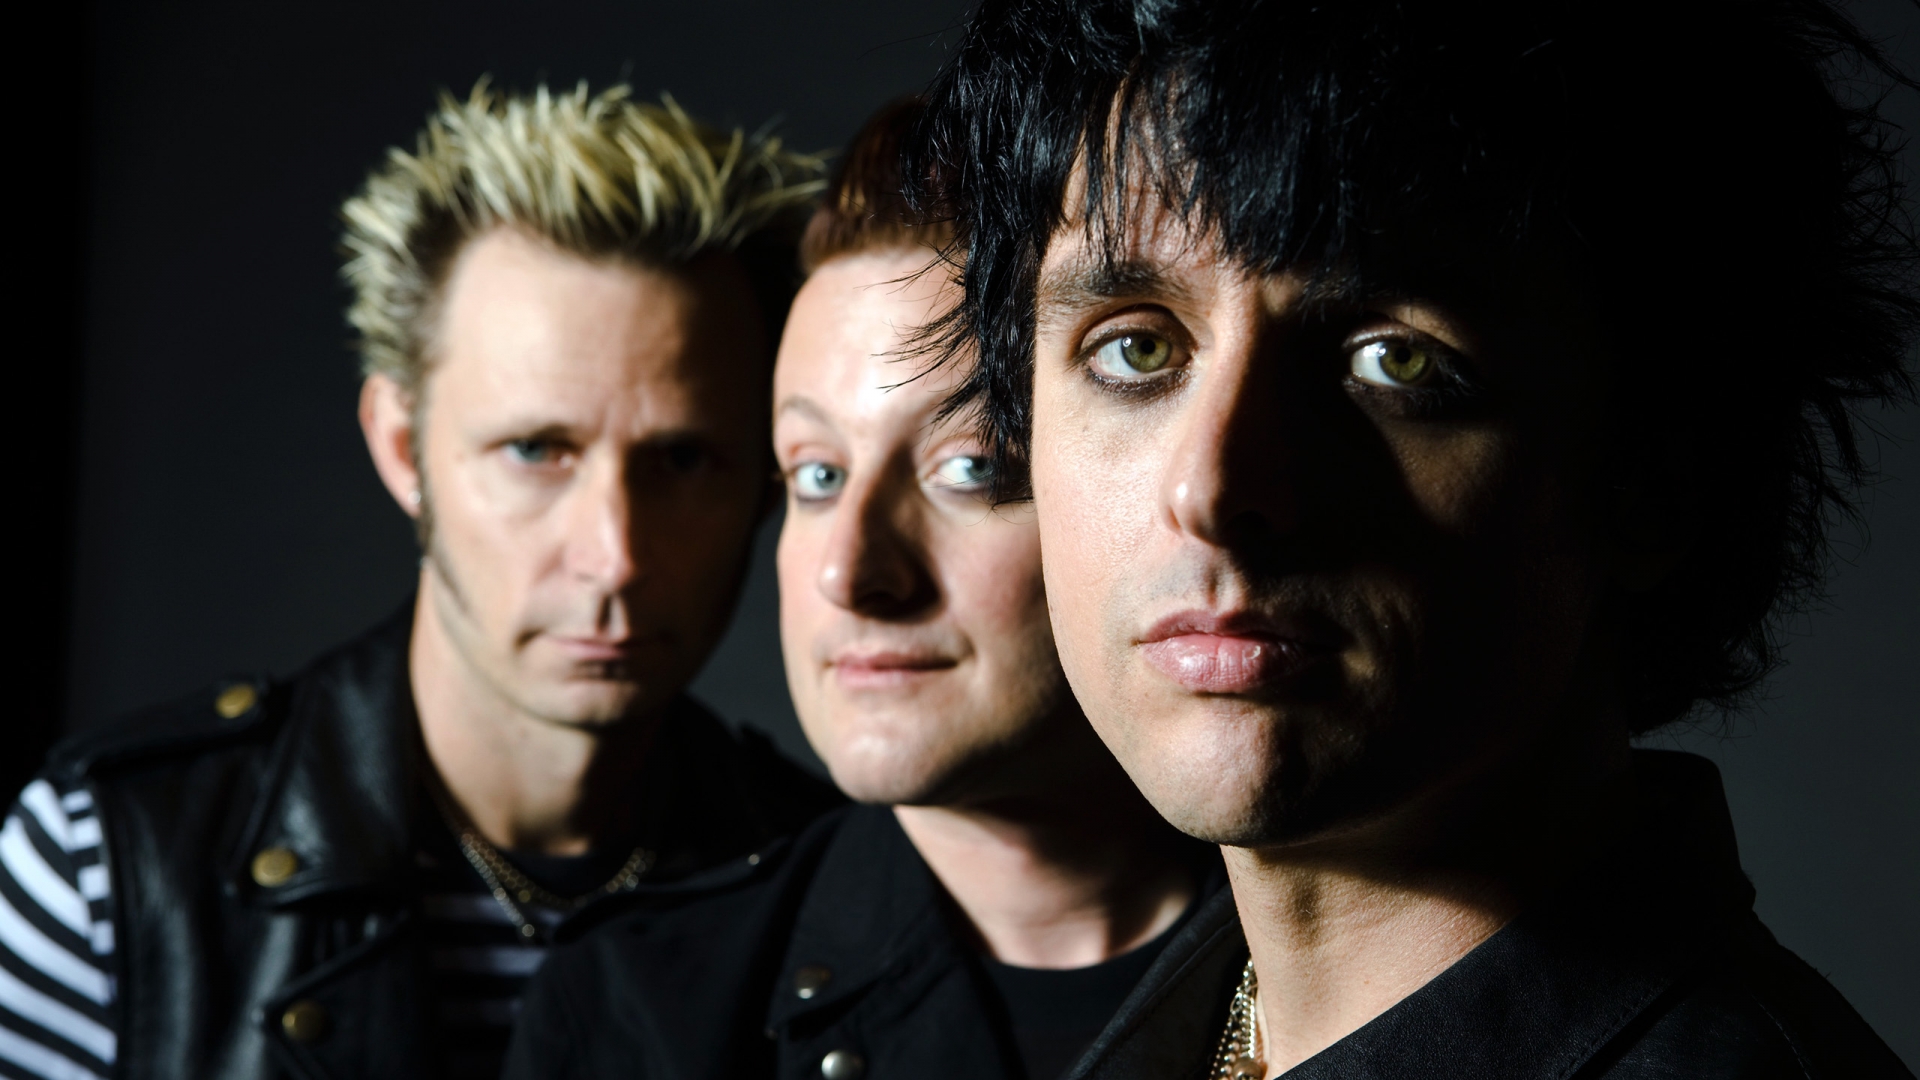 Green Day Band in Blak for 1920 x 1080 HDTV 1080p resolution